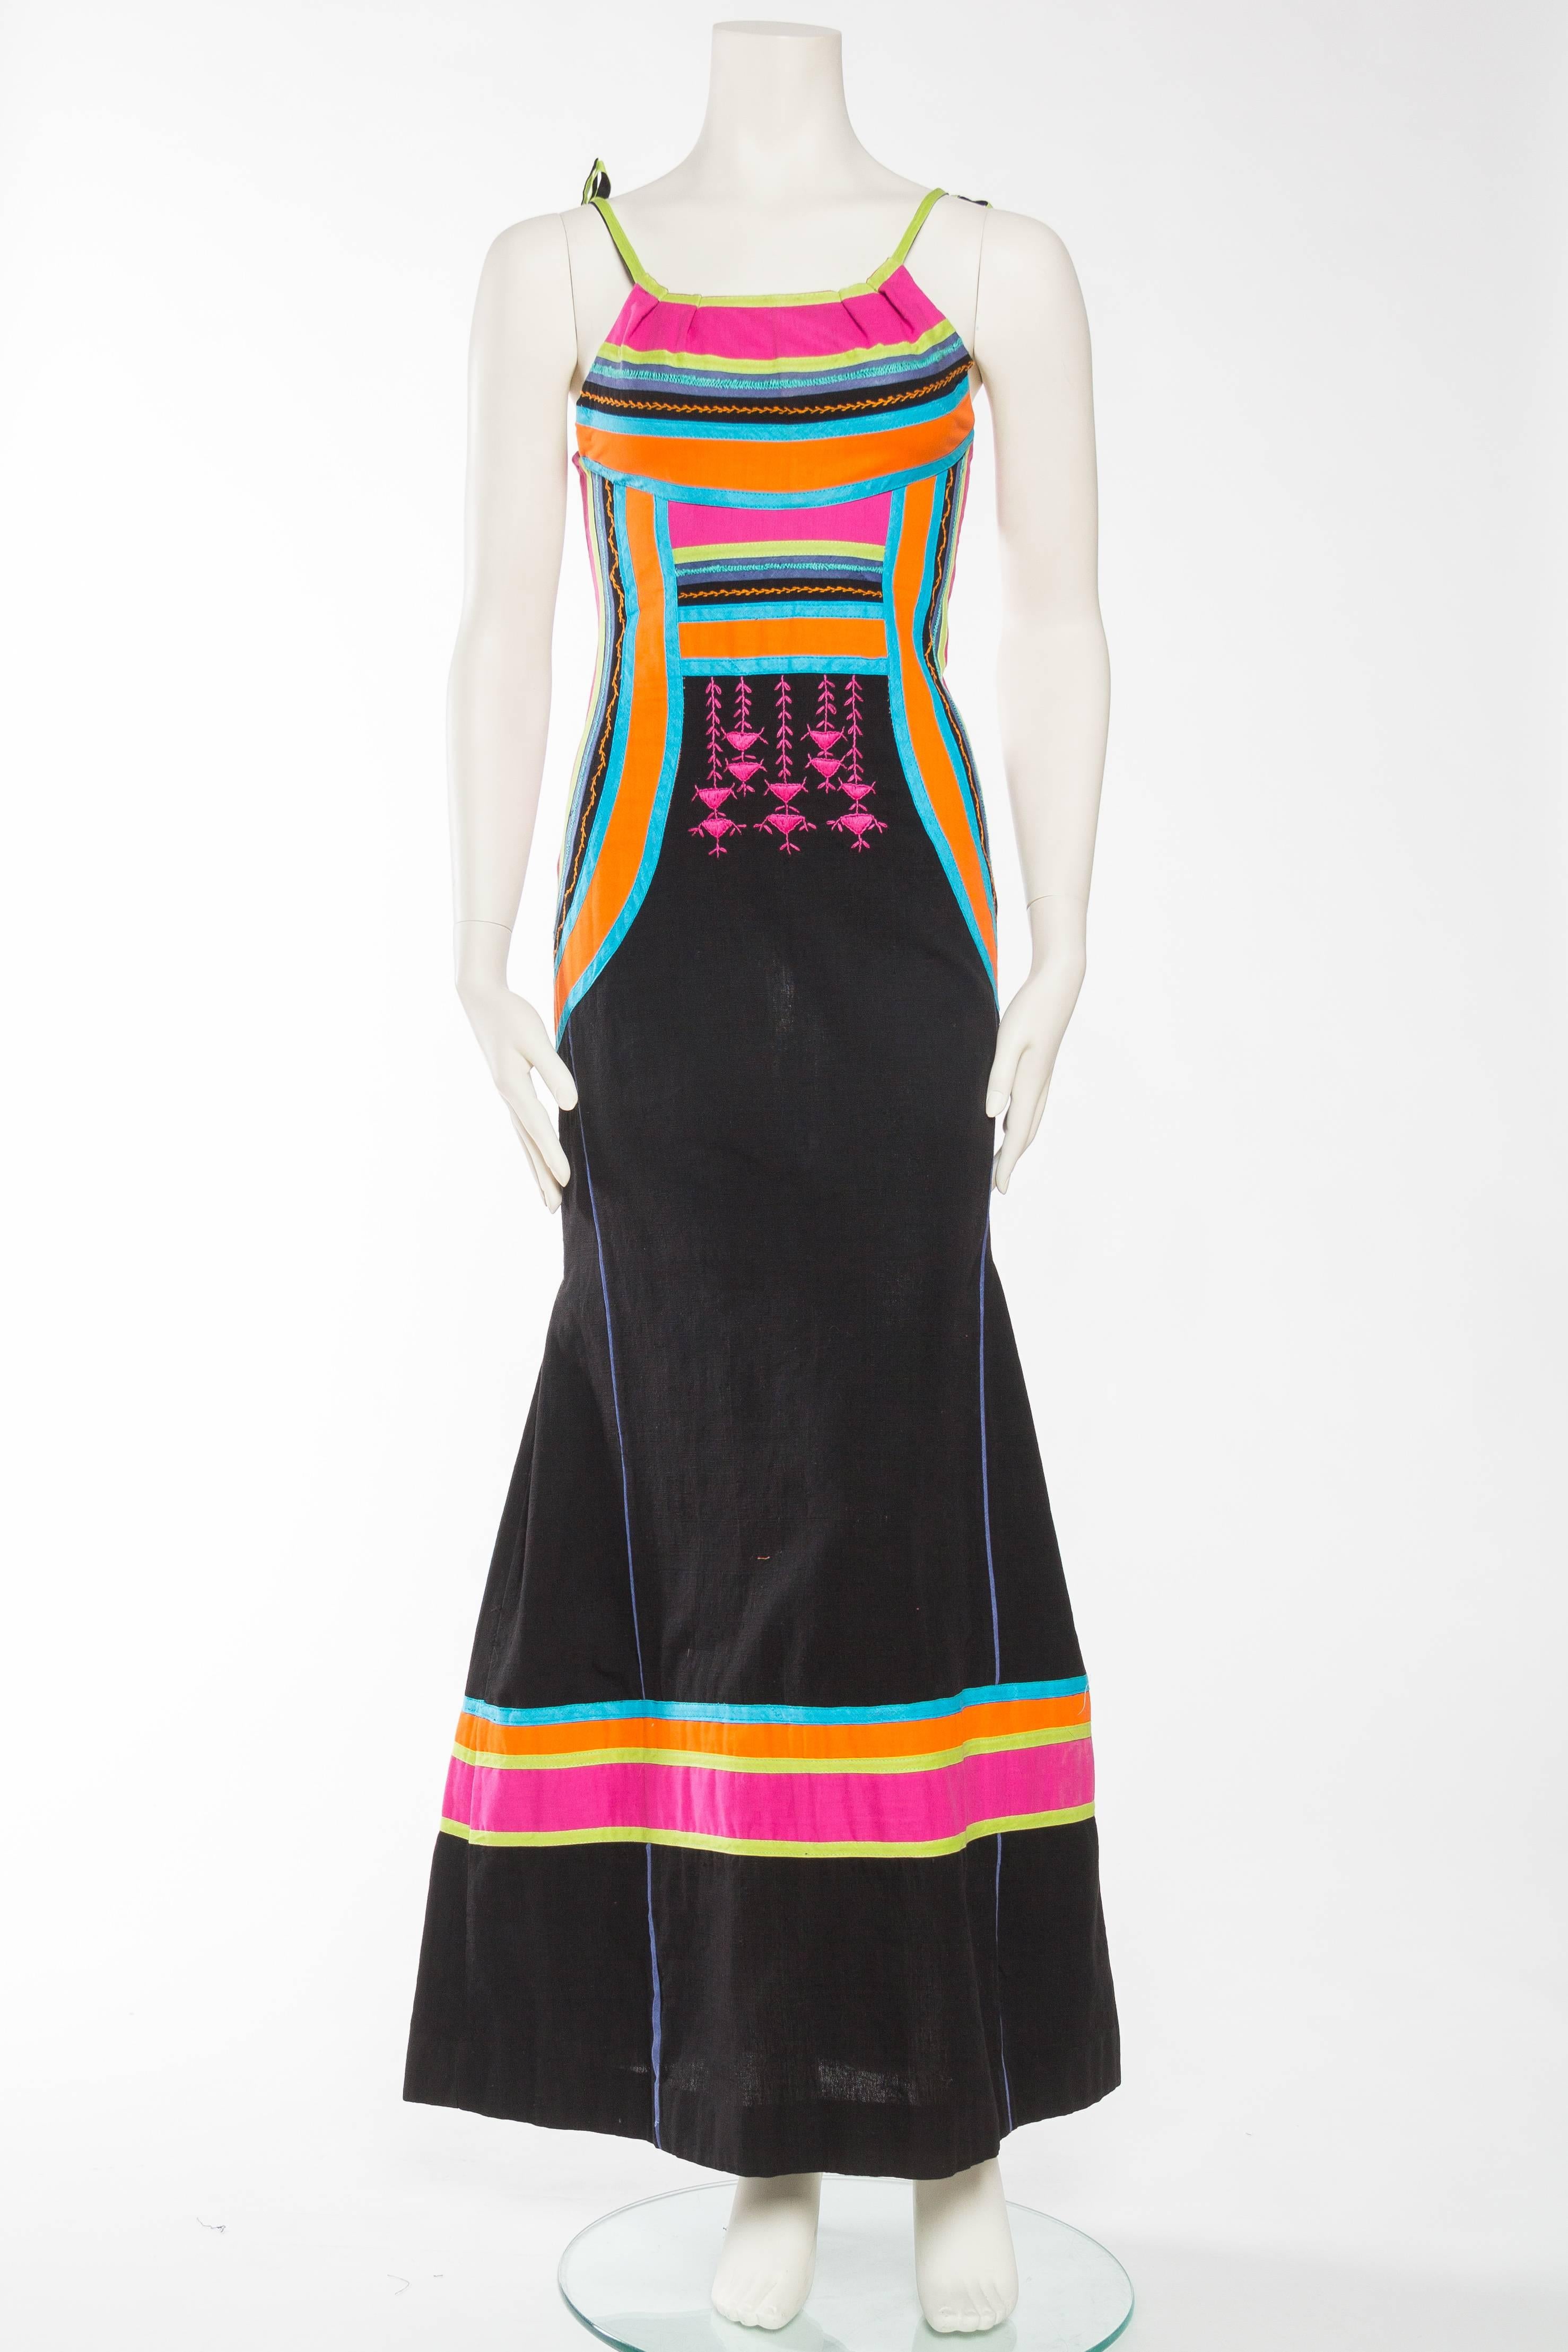 MORPHEW COLLECTION Black Cotton Maxi Dress With Neon Appliqué & Embroidery
MORPHEW COLLECTION is made entirely by hand in our NYC Ateliér of rare antique materials sourced from around the globe. Our sustainable vintage materials represent over a